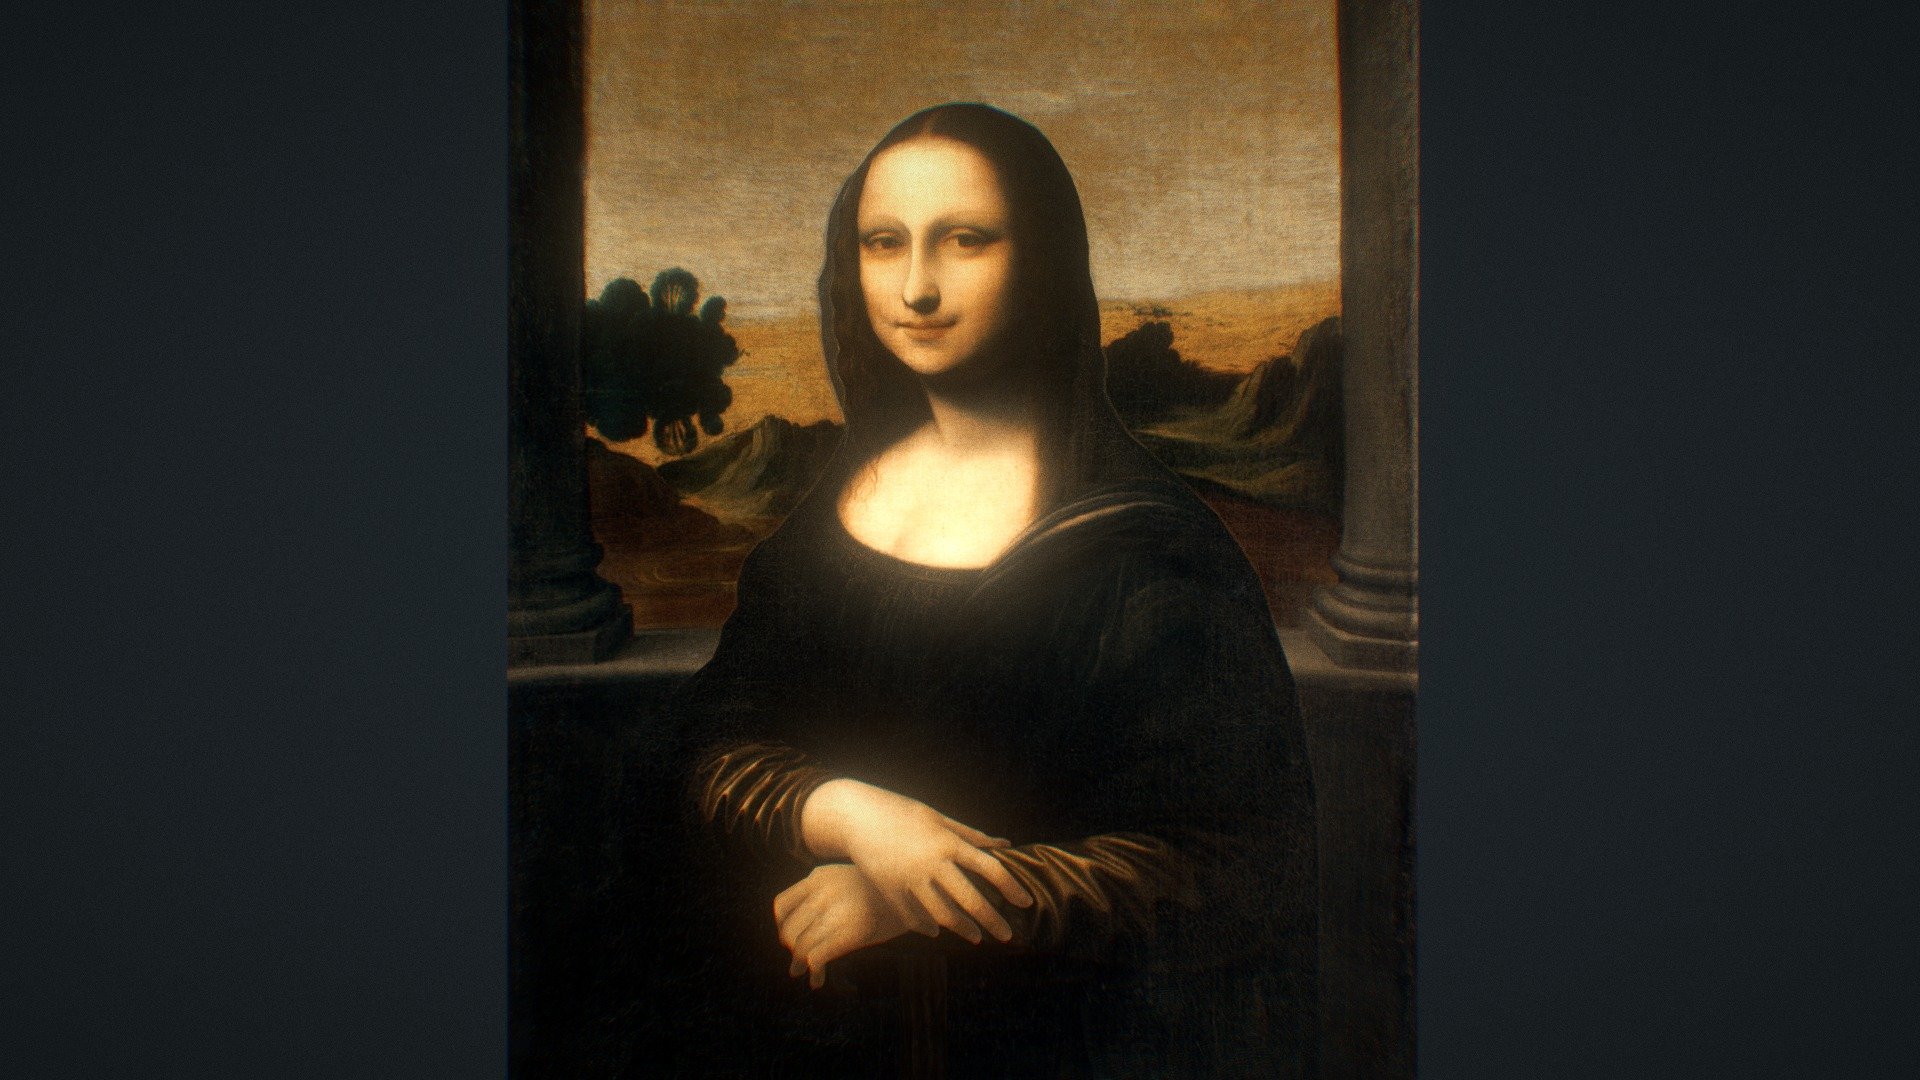 (2020) Isleworth Mona Lisa 3D
This is a 3D tribute to Leonardo da Vinci (April 15, 1452 - May 2, 1519), with The Isleworth Mona Lisa (1503–1516), an oil-on-canvas painting of the same subject as Leonardo da Vinci's Mona Lisa 3d model